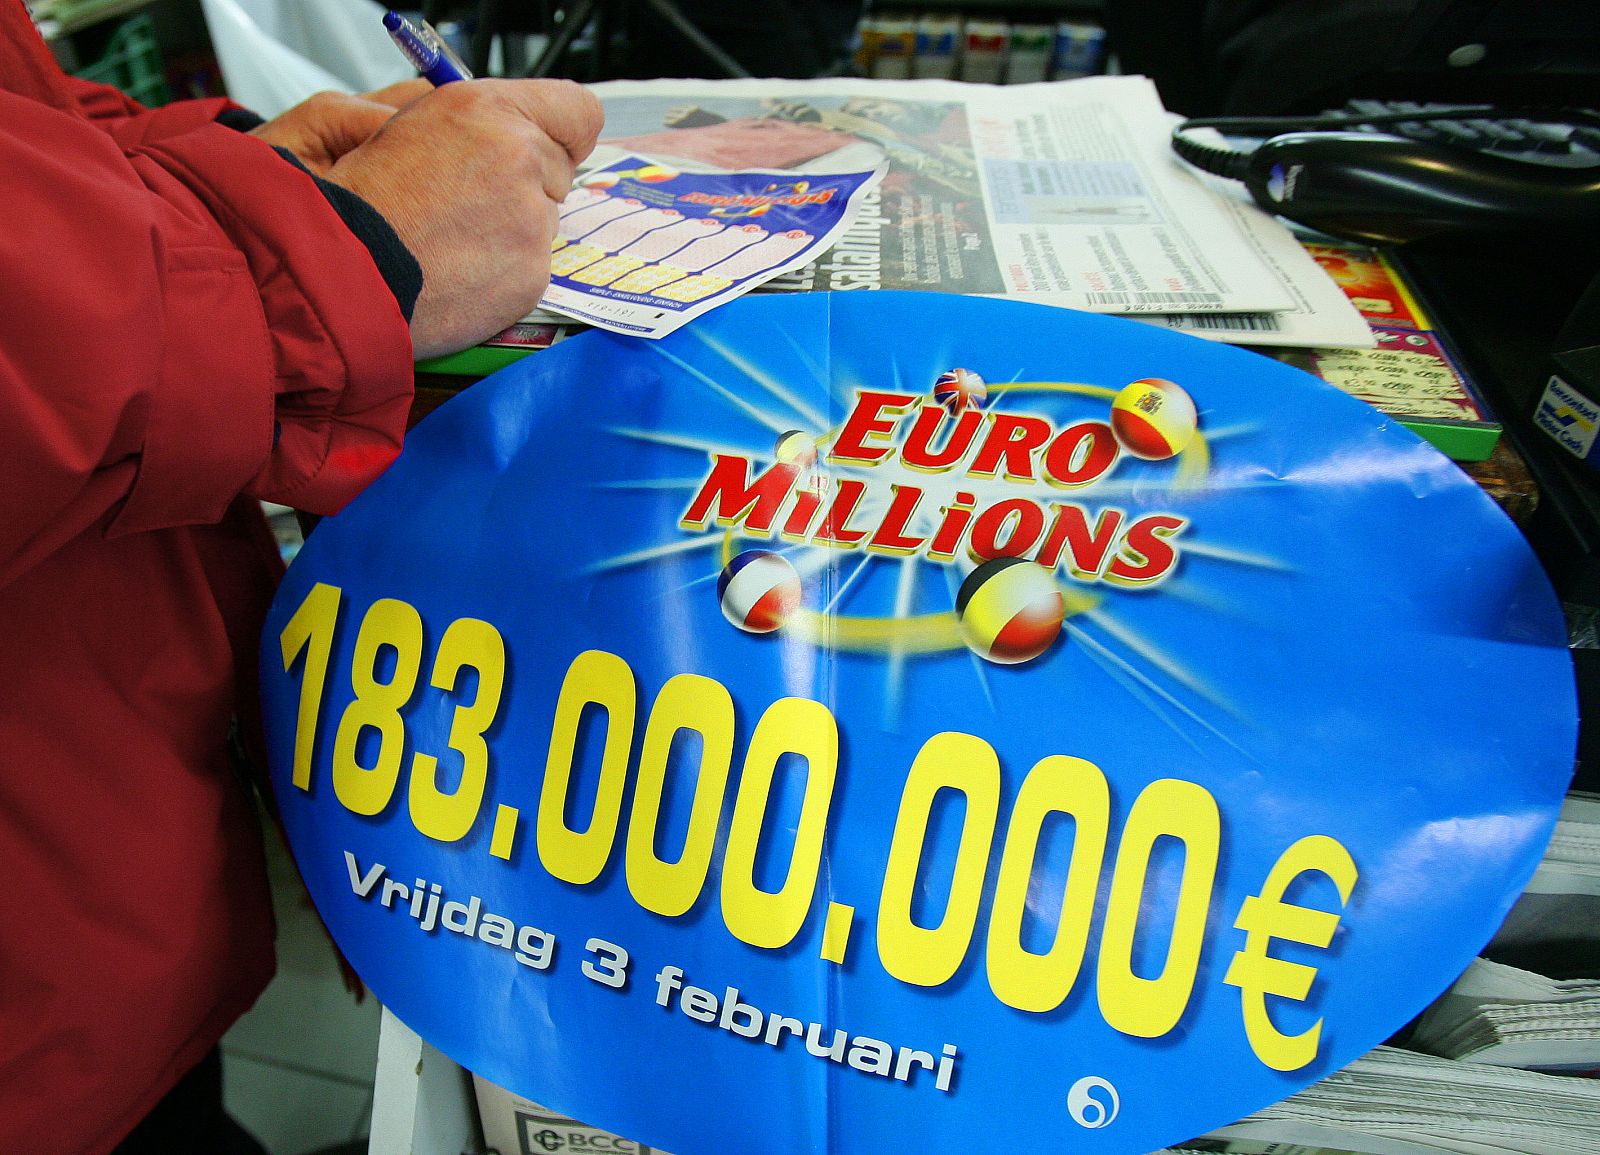 A customer selects numbers on a "EuroMillions" lottery ticket in a shop in Brussels